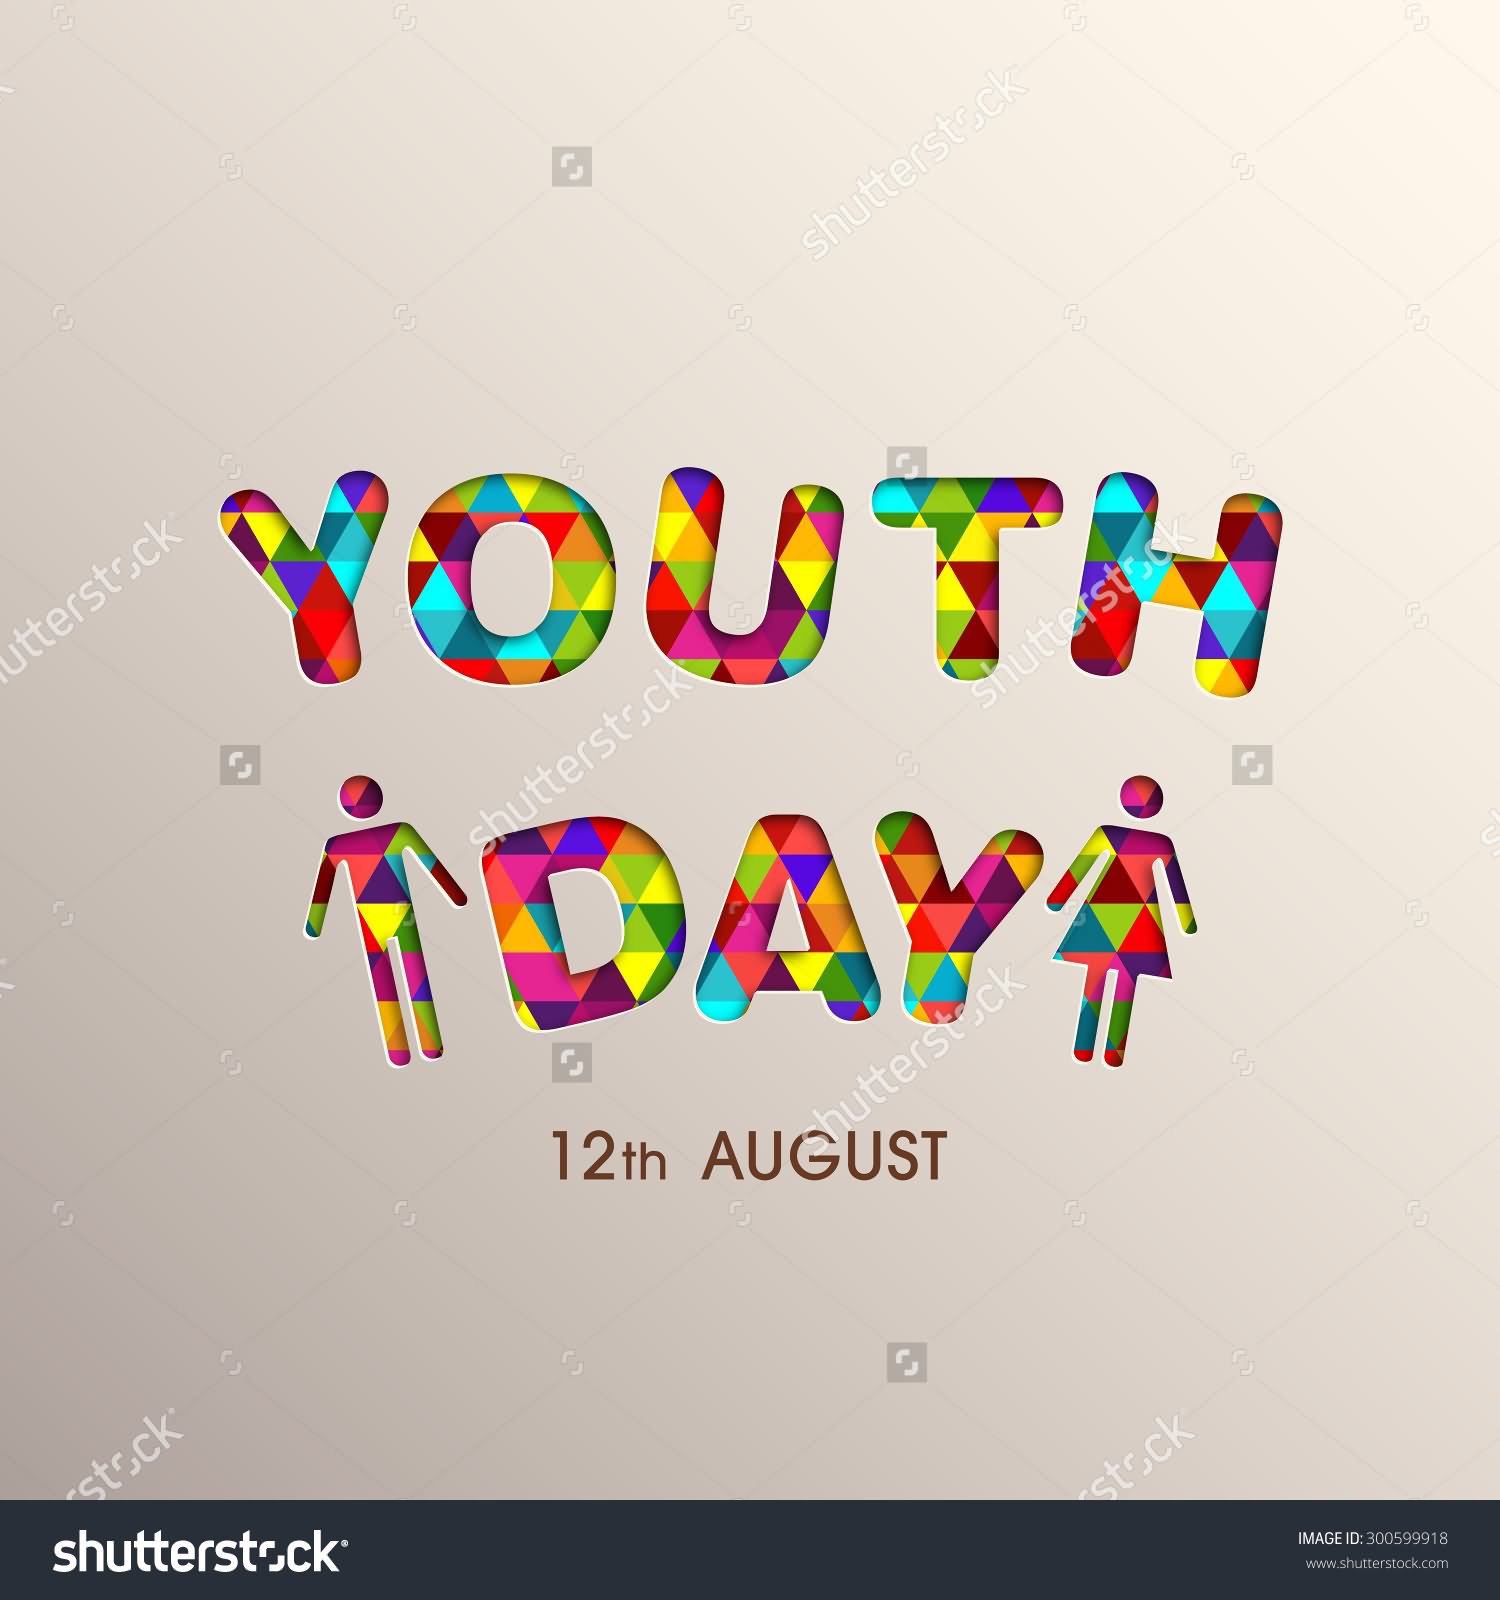 Youth Day 12th August Colorful Picture